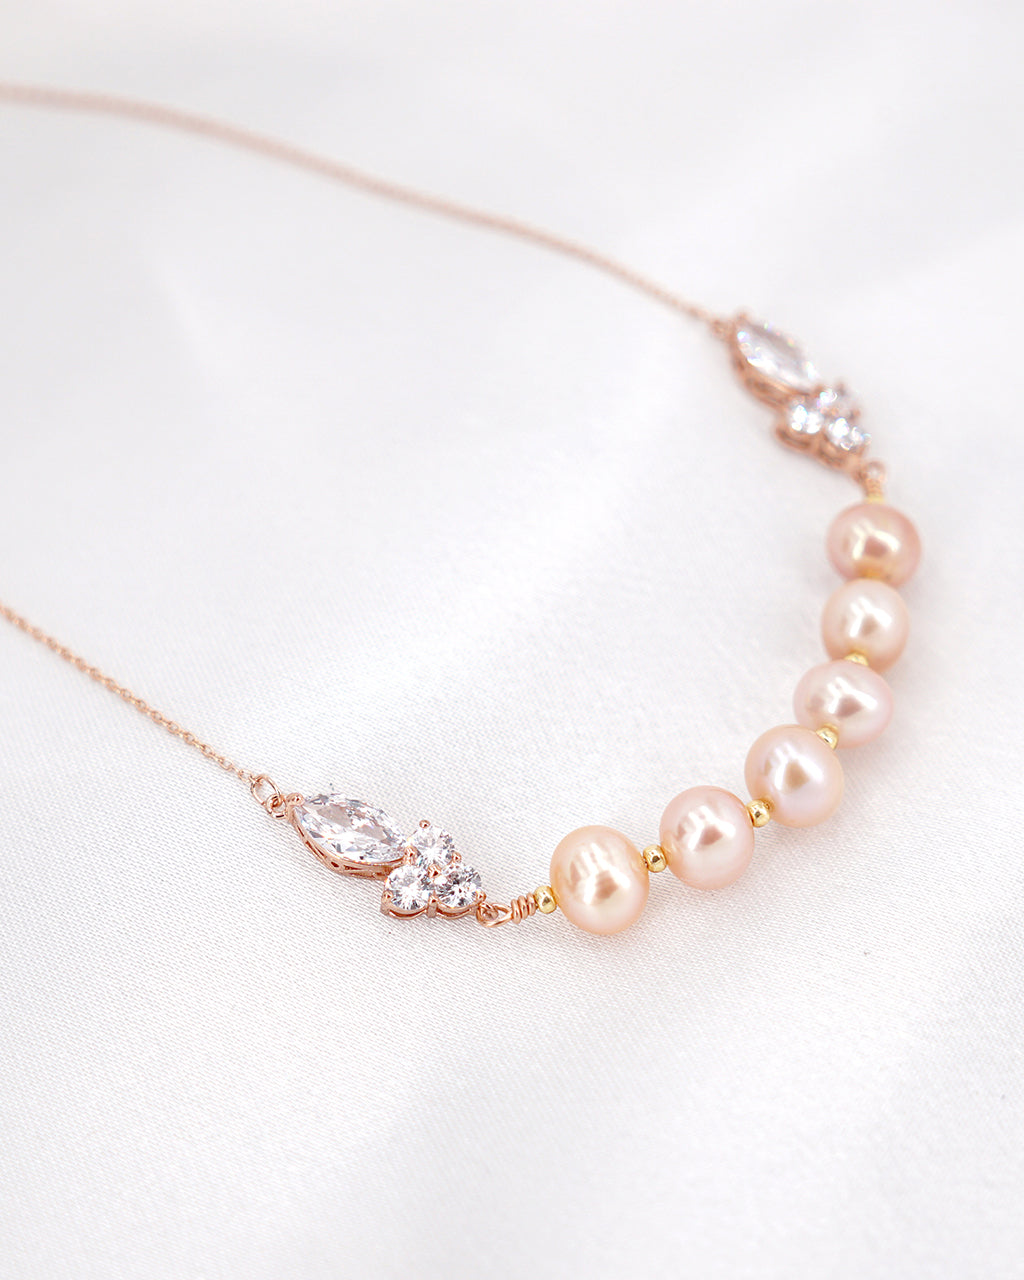 Peach Fuzz Freshwater Pearl Royal Necklace - Wedding Bridal Jewelry for Brides and Bridesmaids | Singapore